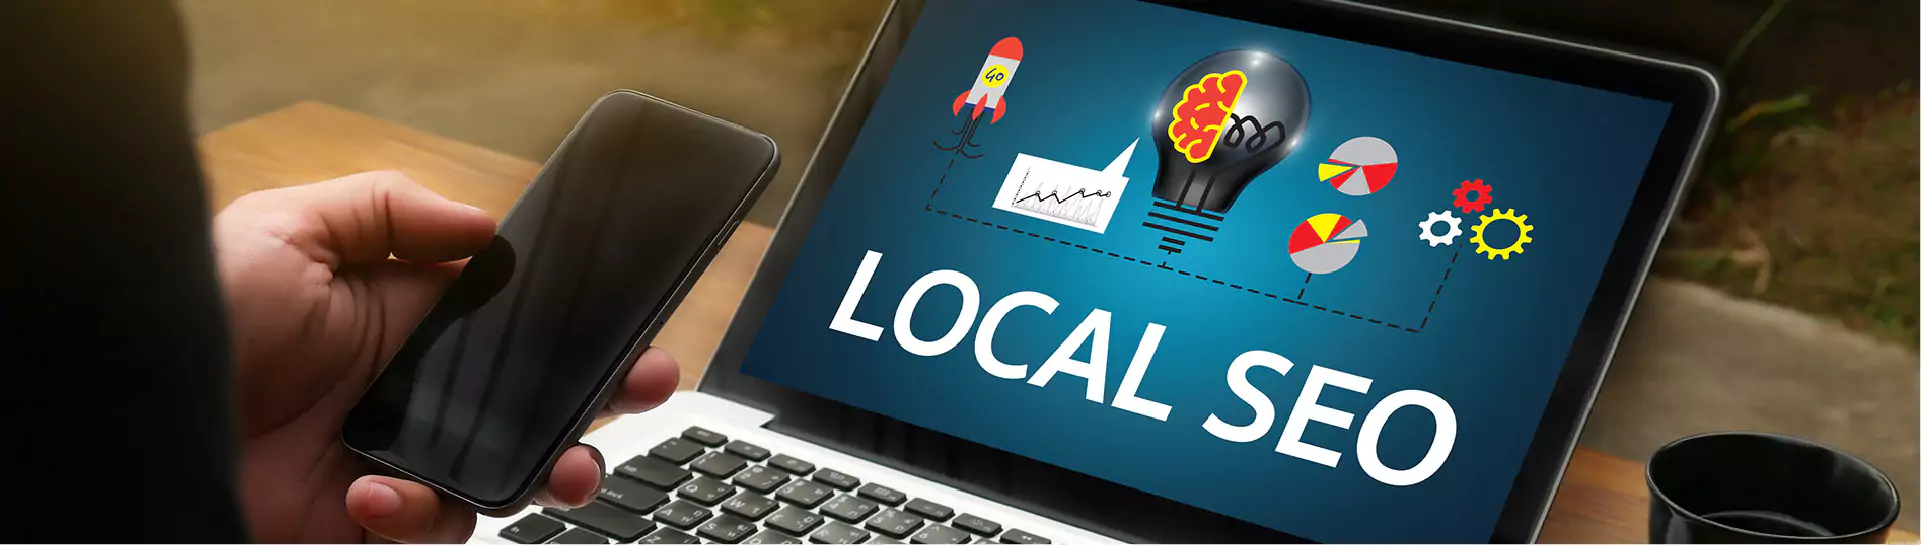 5 Benefits of Local SEO to Small Businesses